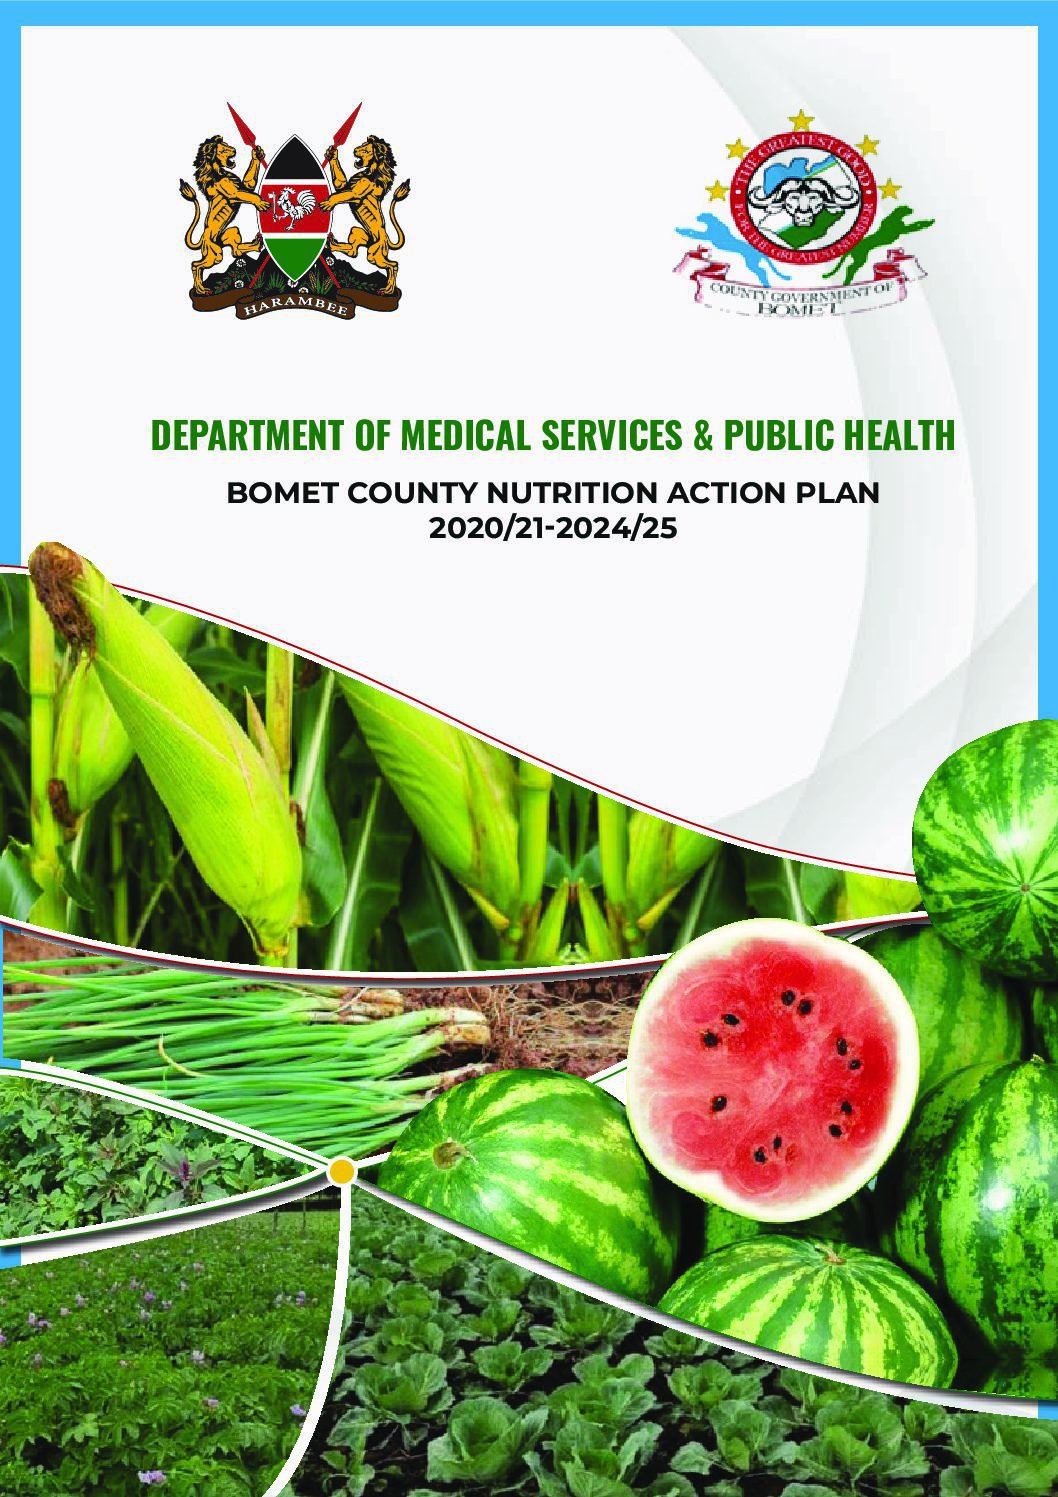 Bomet County Nutrition Action Plan 2020/21 – 2024/25 thumbnail